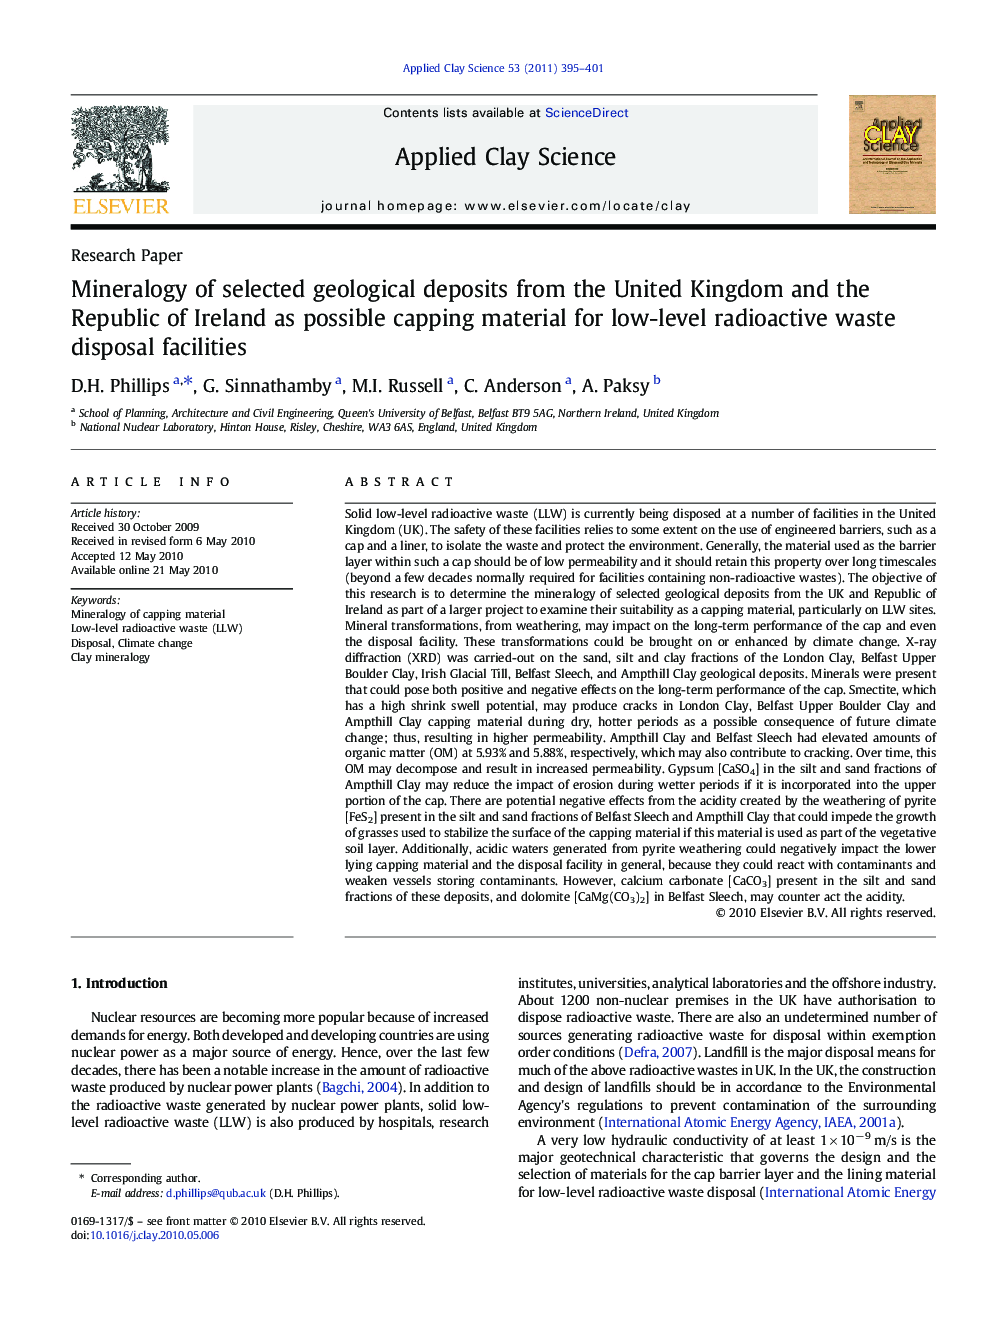 Mineralogy of selected geological deposits from the United Kingdom and the Republic of Ireland as possible capping material for low-level radioactive waste disposal facilities